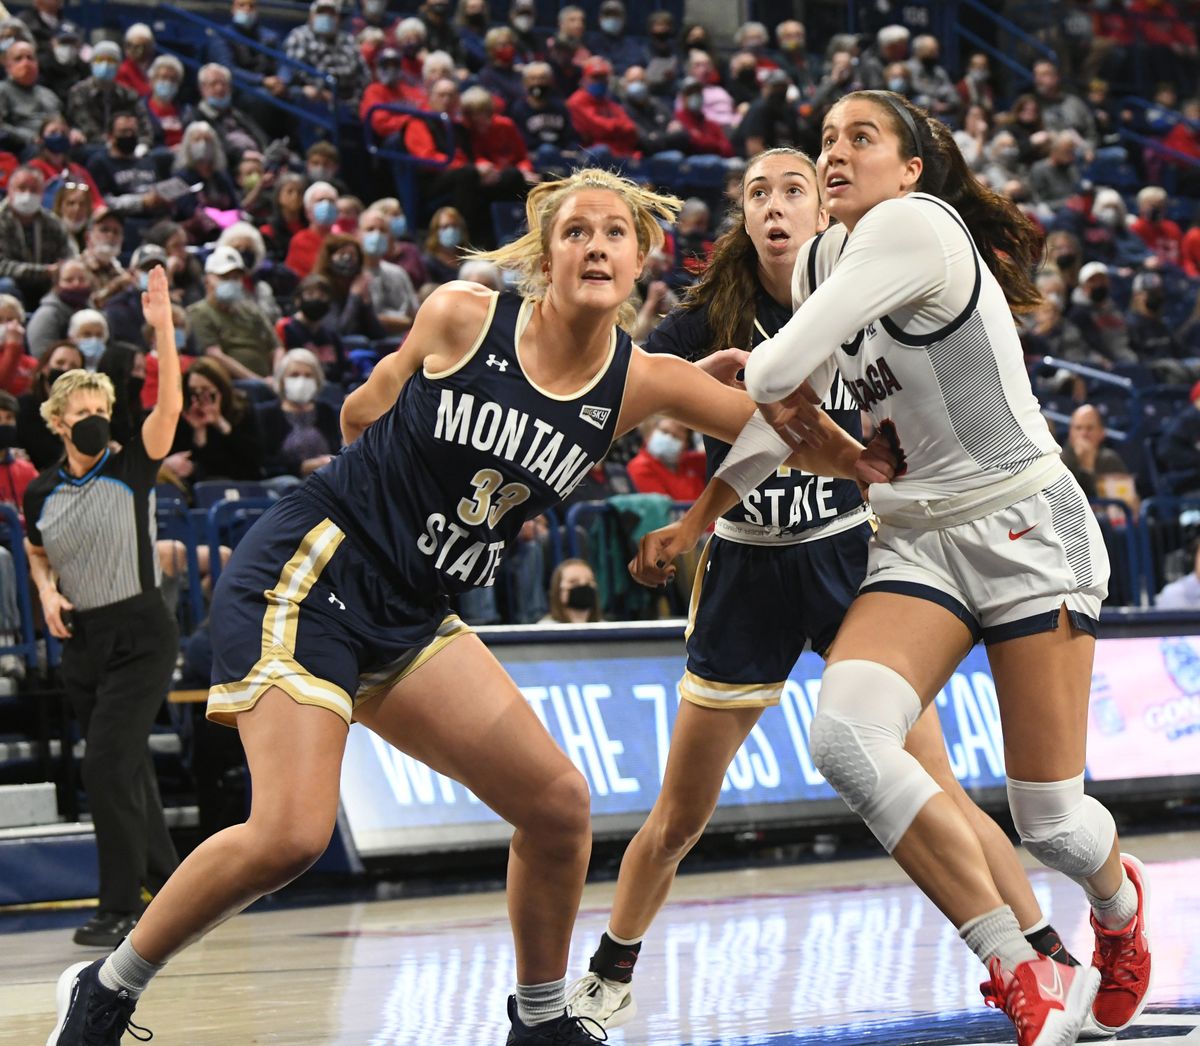 Gonzaga’s Melody Kempton, right, tries to get away Montana State’s Lindsey Hein (33), left, and Katelynn Limardo, center, while looking for a rebound under the basket during the Gonzaga matchup with Montana State Thiursday, Nov. 11, 2021 at McCarthey Athletic Center at Gonzaga University in Spokane, Washington.  (Jesse Tinsley/The Spokesman-Review)